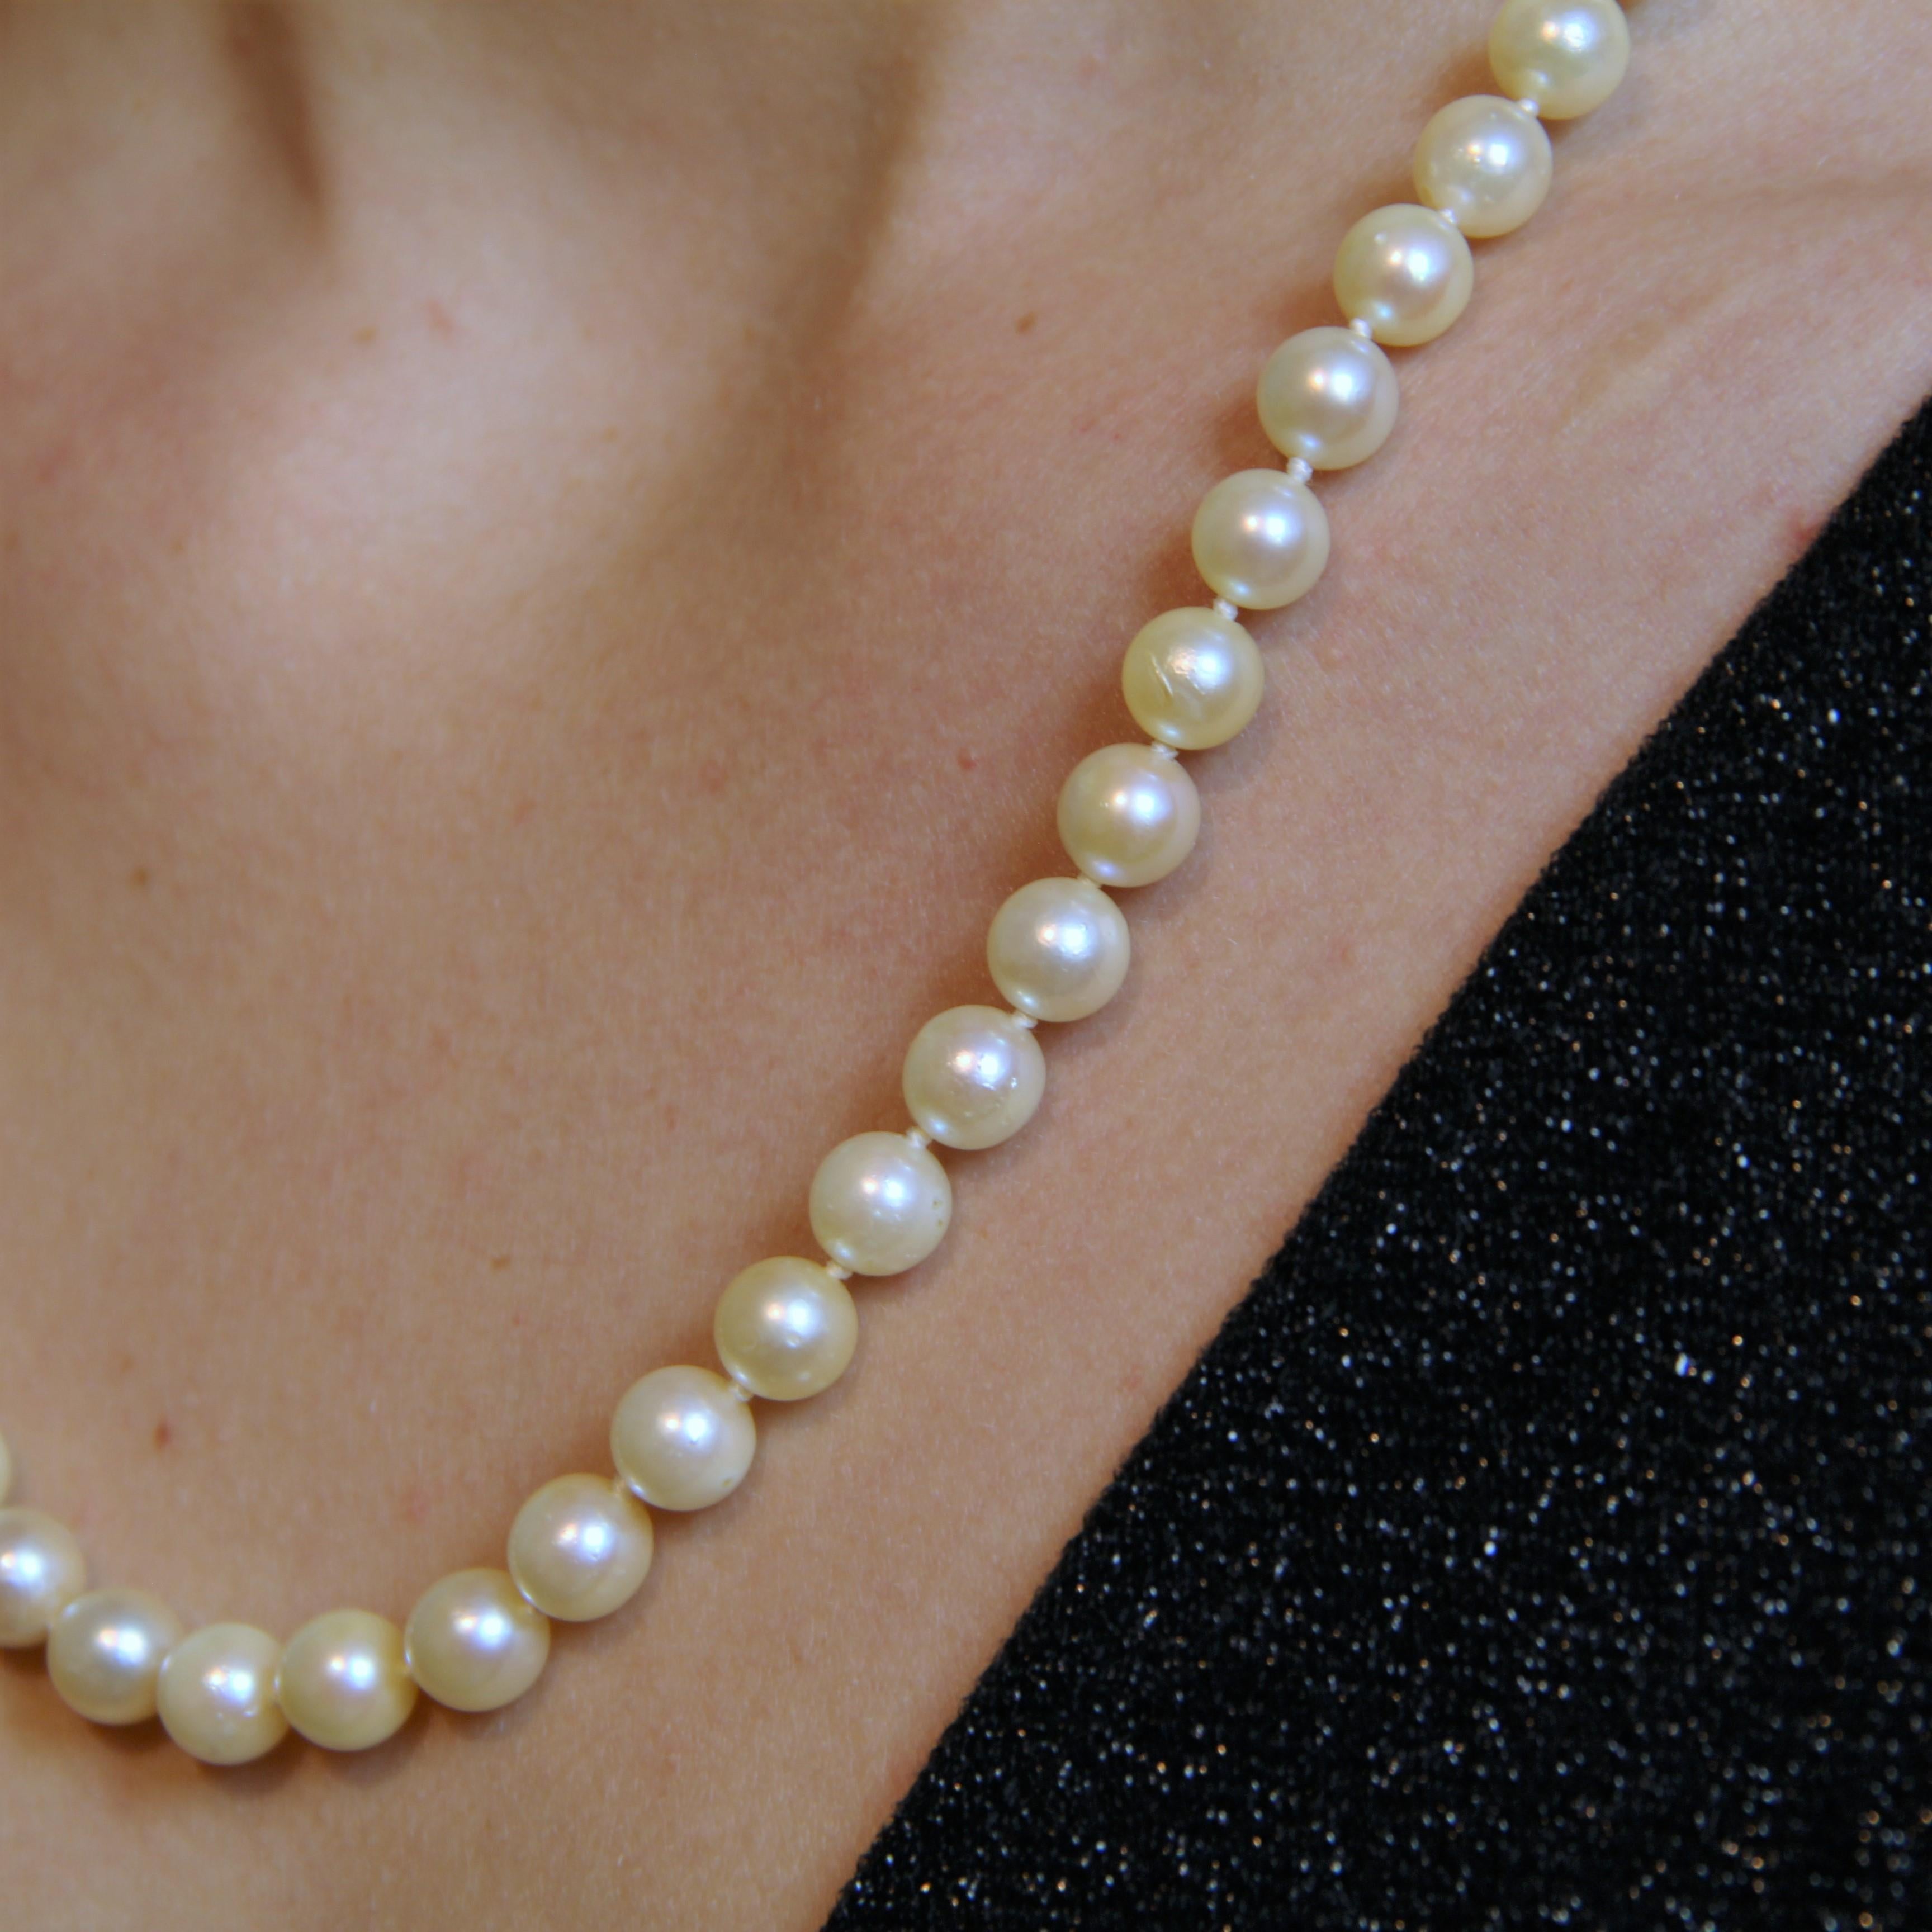 French 1950s Cultured Pearl Choker Necklace For Sale 2